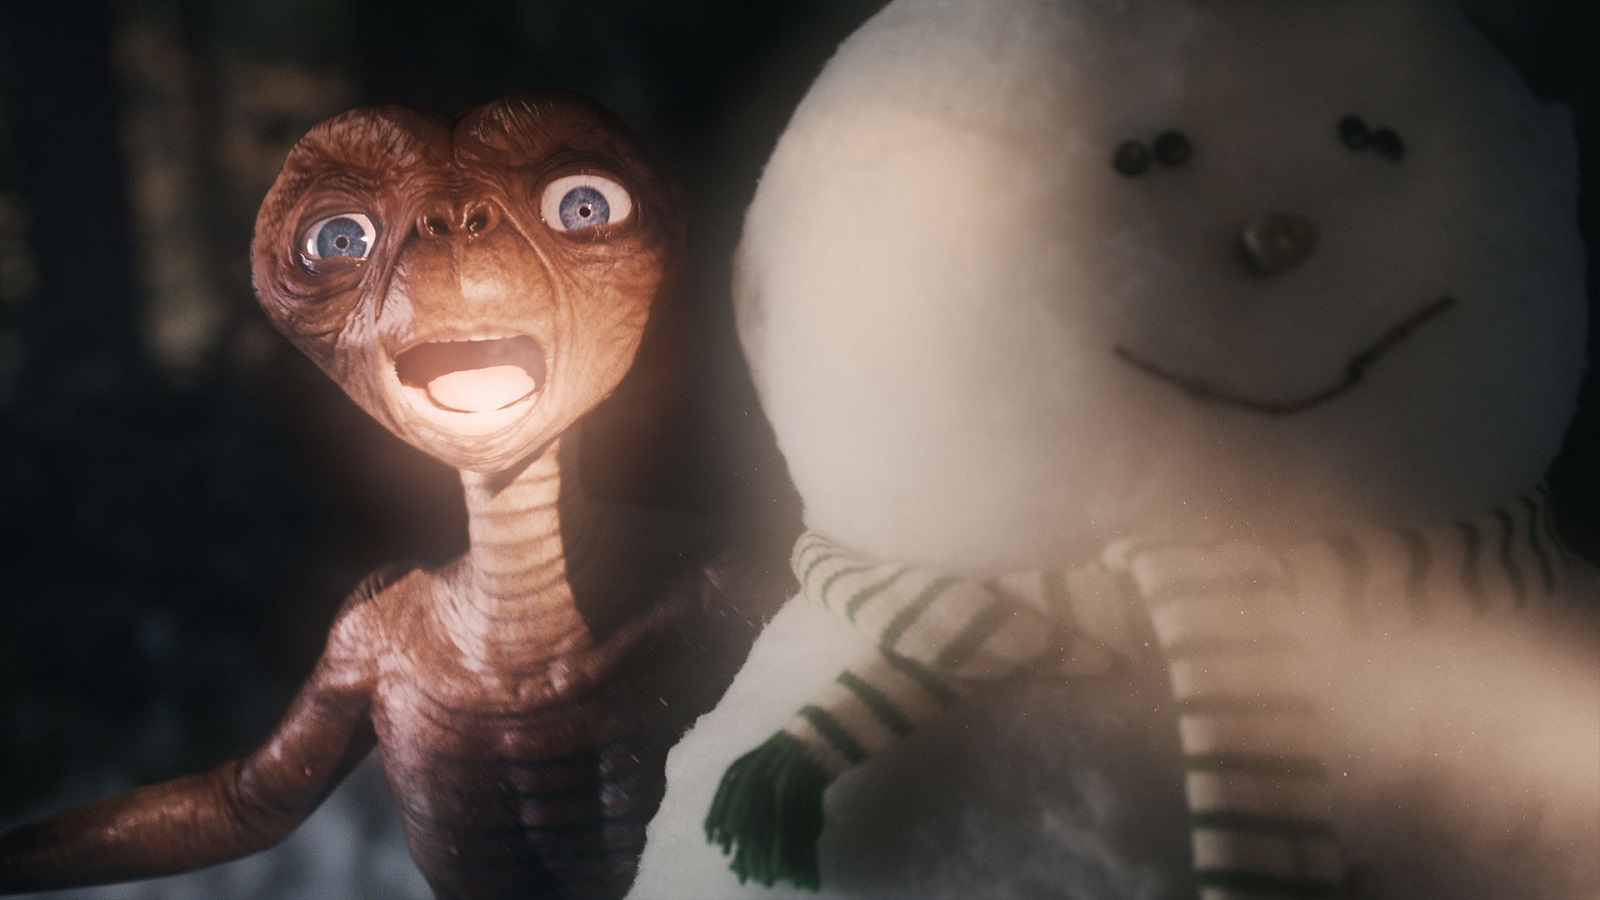 E.T. Comes Back Home After 37 Years of Silence